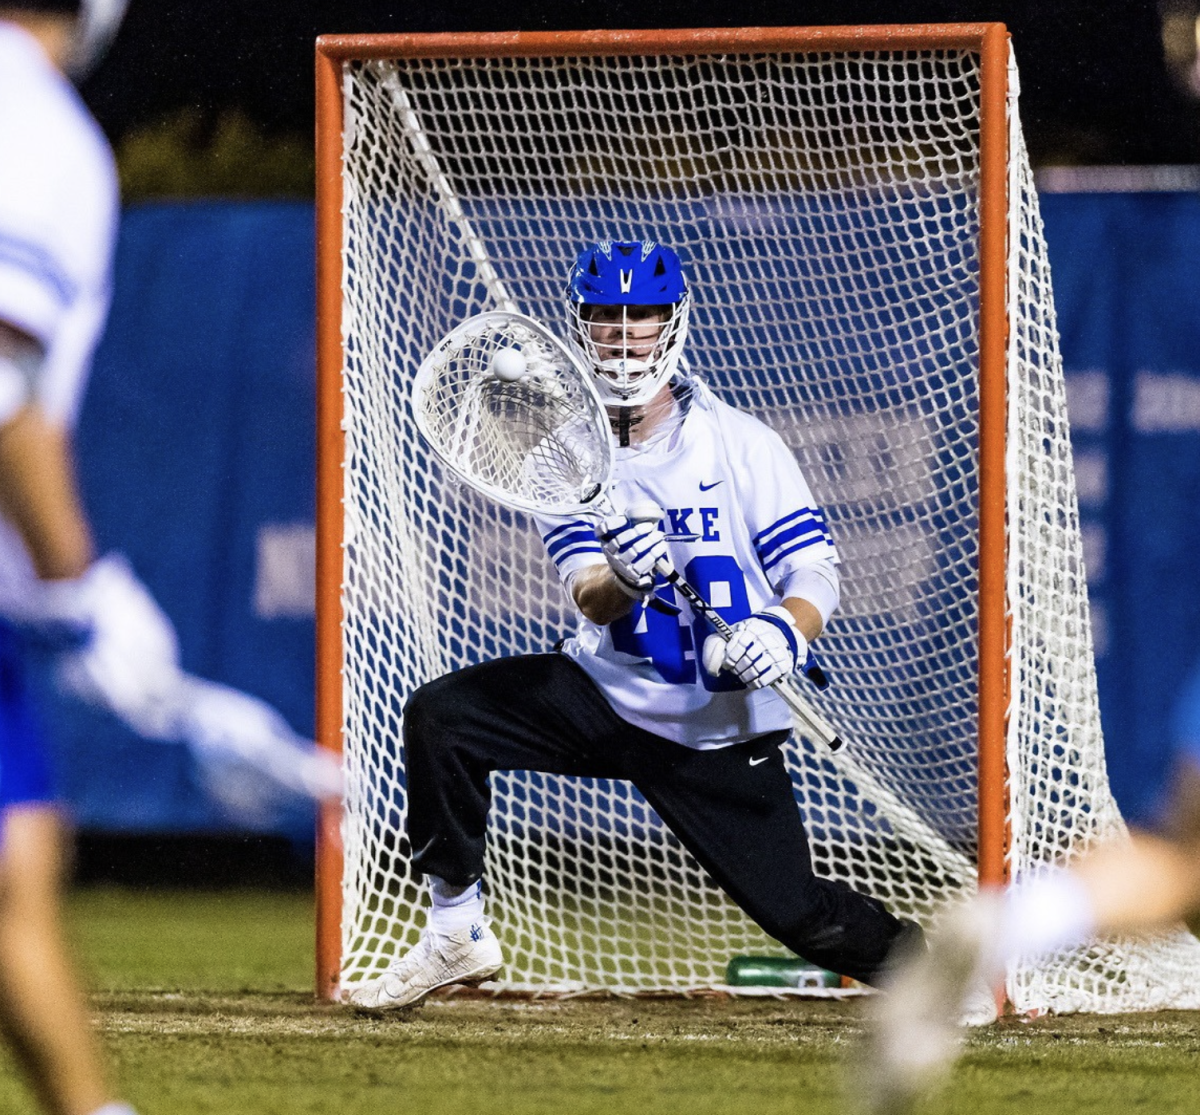 Will Helm ’18 averaged only 10.97 goals allowed per game, a key contribution that helped Duke reach the NCAA Division I championship against Notre Dame last year.